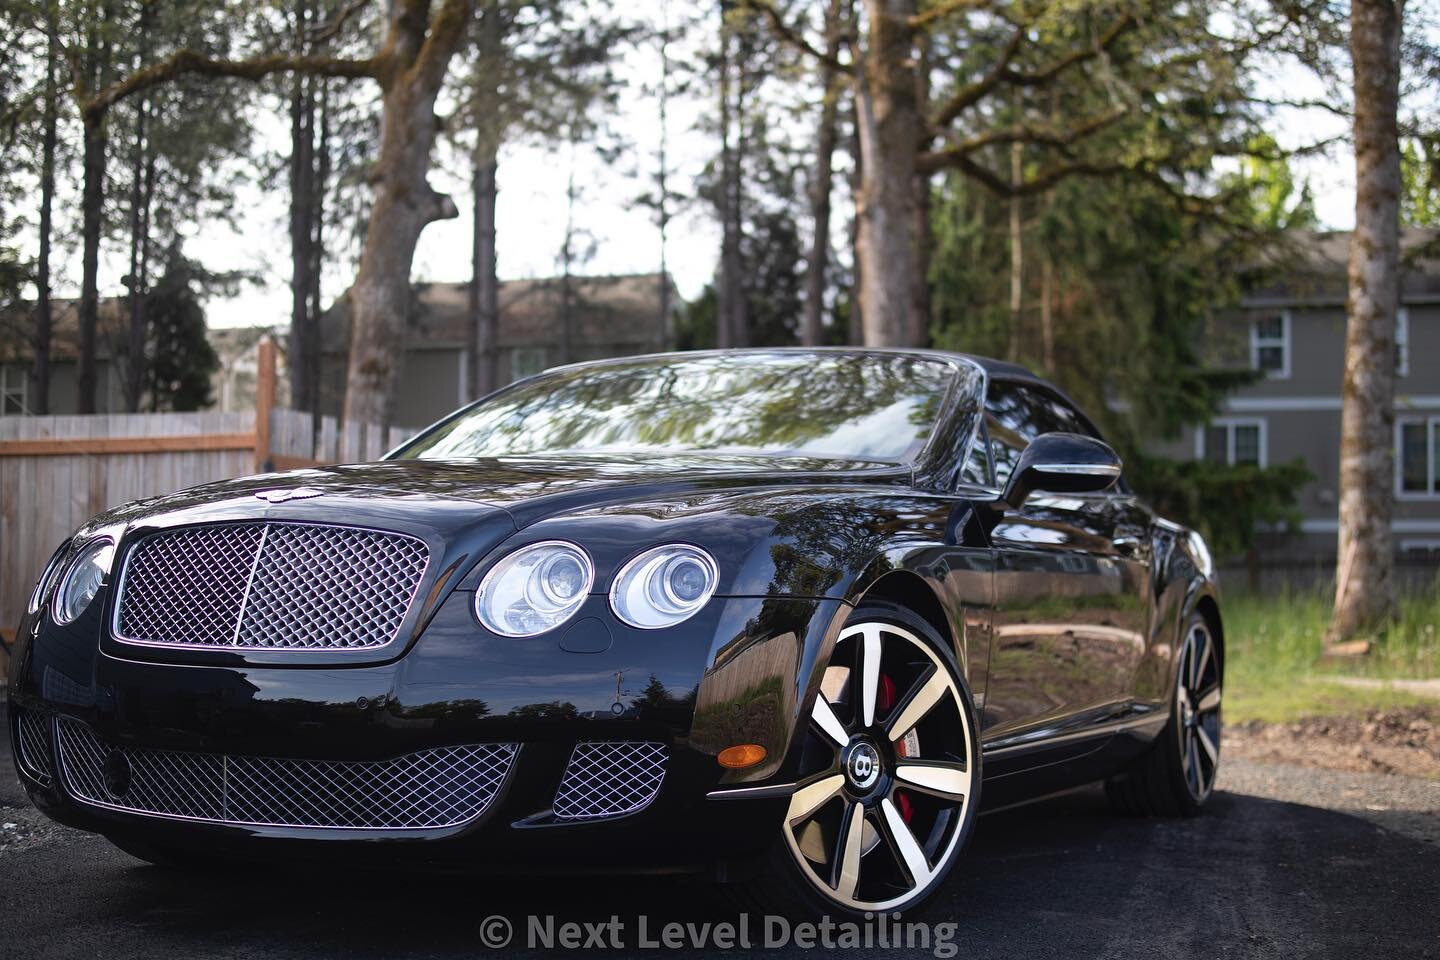 Bentley

Came in for a Paint Correction, Ceramic Coating and Wheel Coating.
&bull;
&bull;
&bull;
&bull;
#bentley #bentleycontinental #english #detailing #luxury #luxurylifestyle #car #cars #carporn #photooftheday #photo #photography #picoftheday #pic